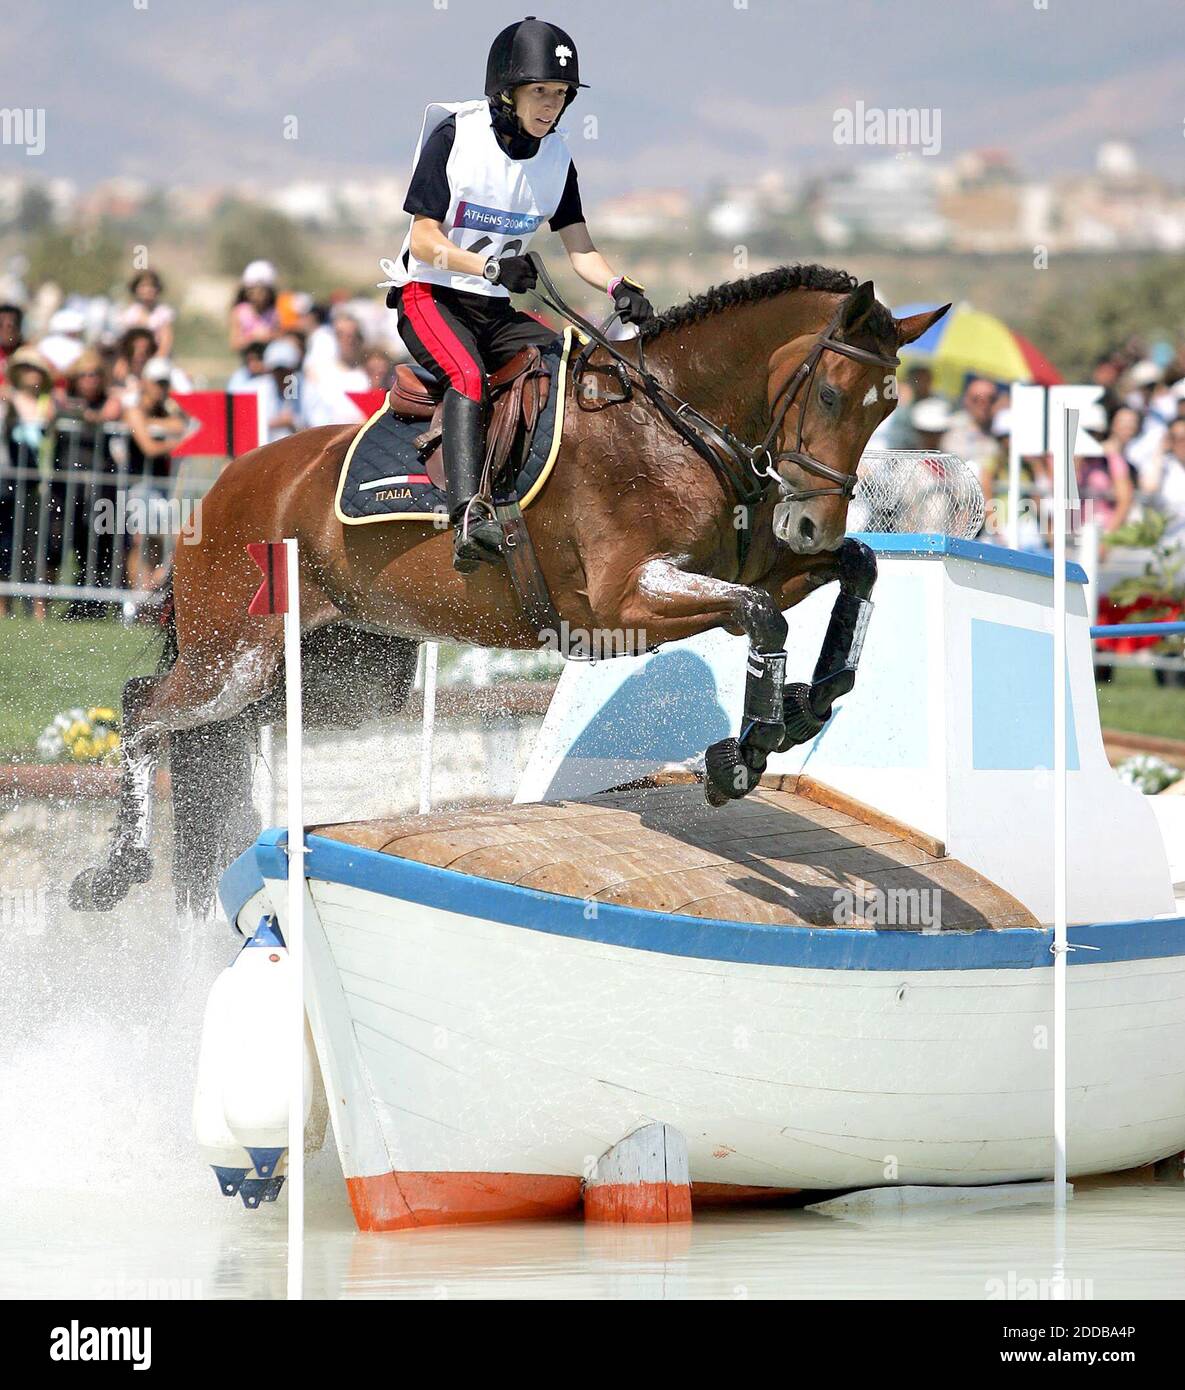 NO FILM, NO VIDEO, NO TV, NO DOCUMENTARY - Susanna Bordone of Italy navigates the cross country course of team eventing on Tuesday, August 17, 2004, in the 2004 Olympic Games in Markopoulo. Photo by Al DIaz/Miami Herald/KRT/ABACA. Stock Photo